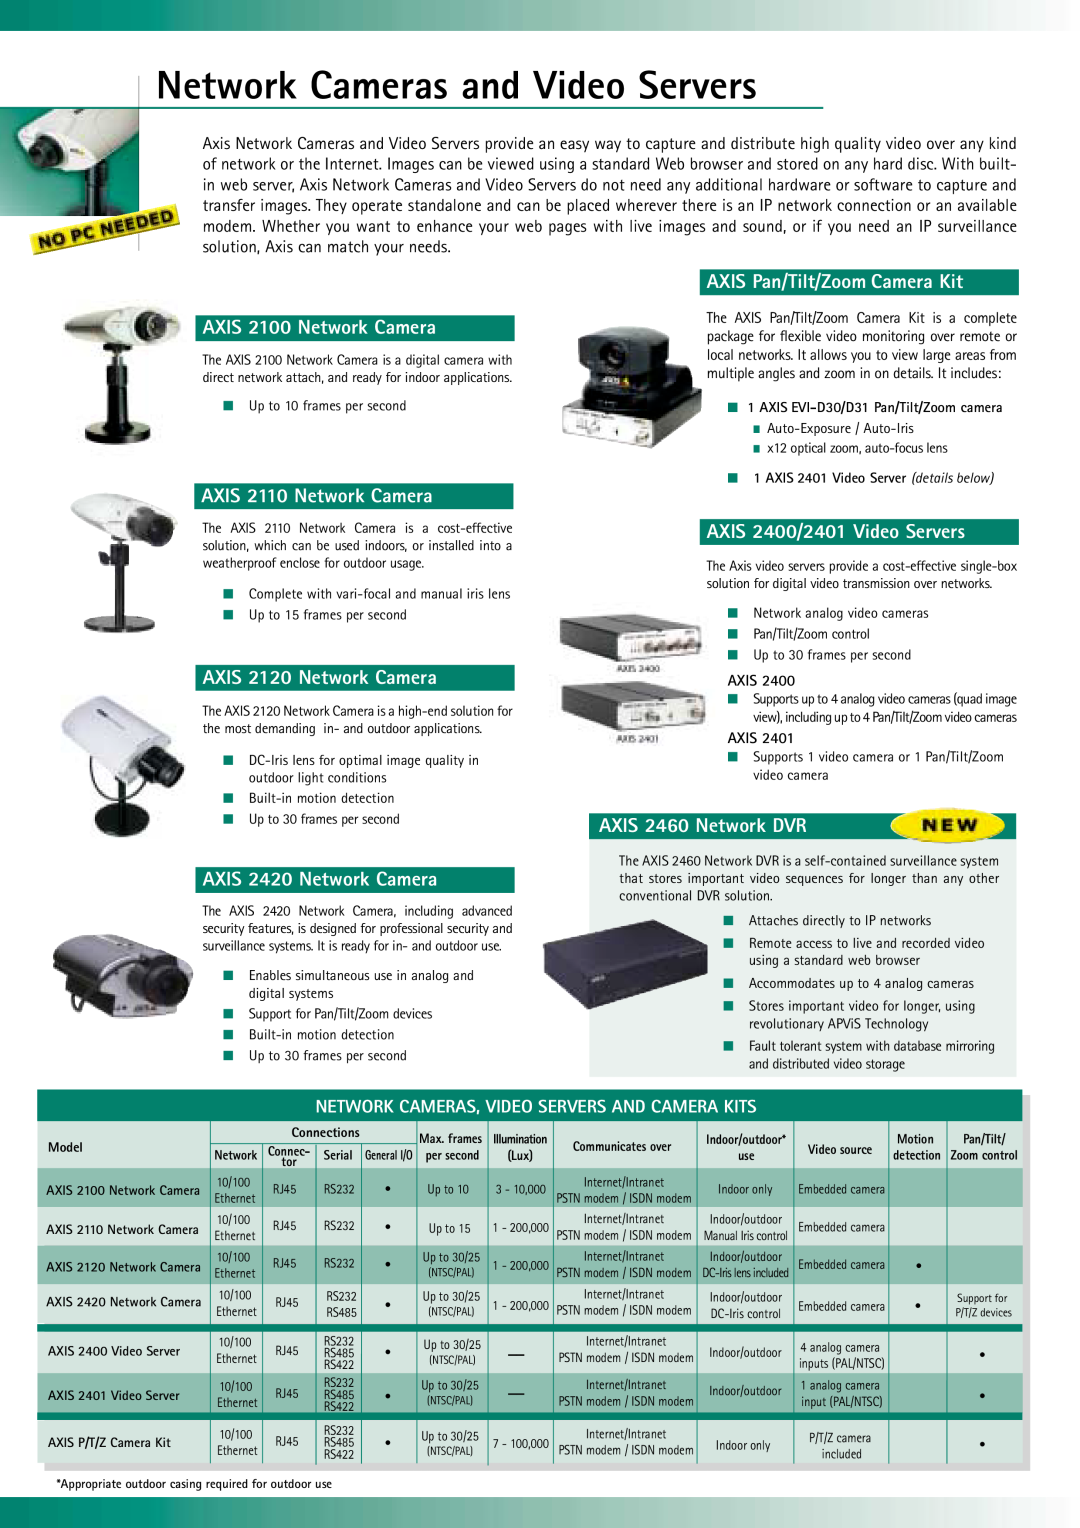 Axis Communications RJ45 manual Network Cameras and Video Servers, AXIS 2100 Network Camera, AXIS 2110 Network Camera, Axis 